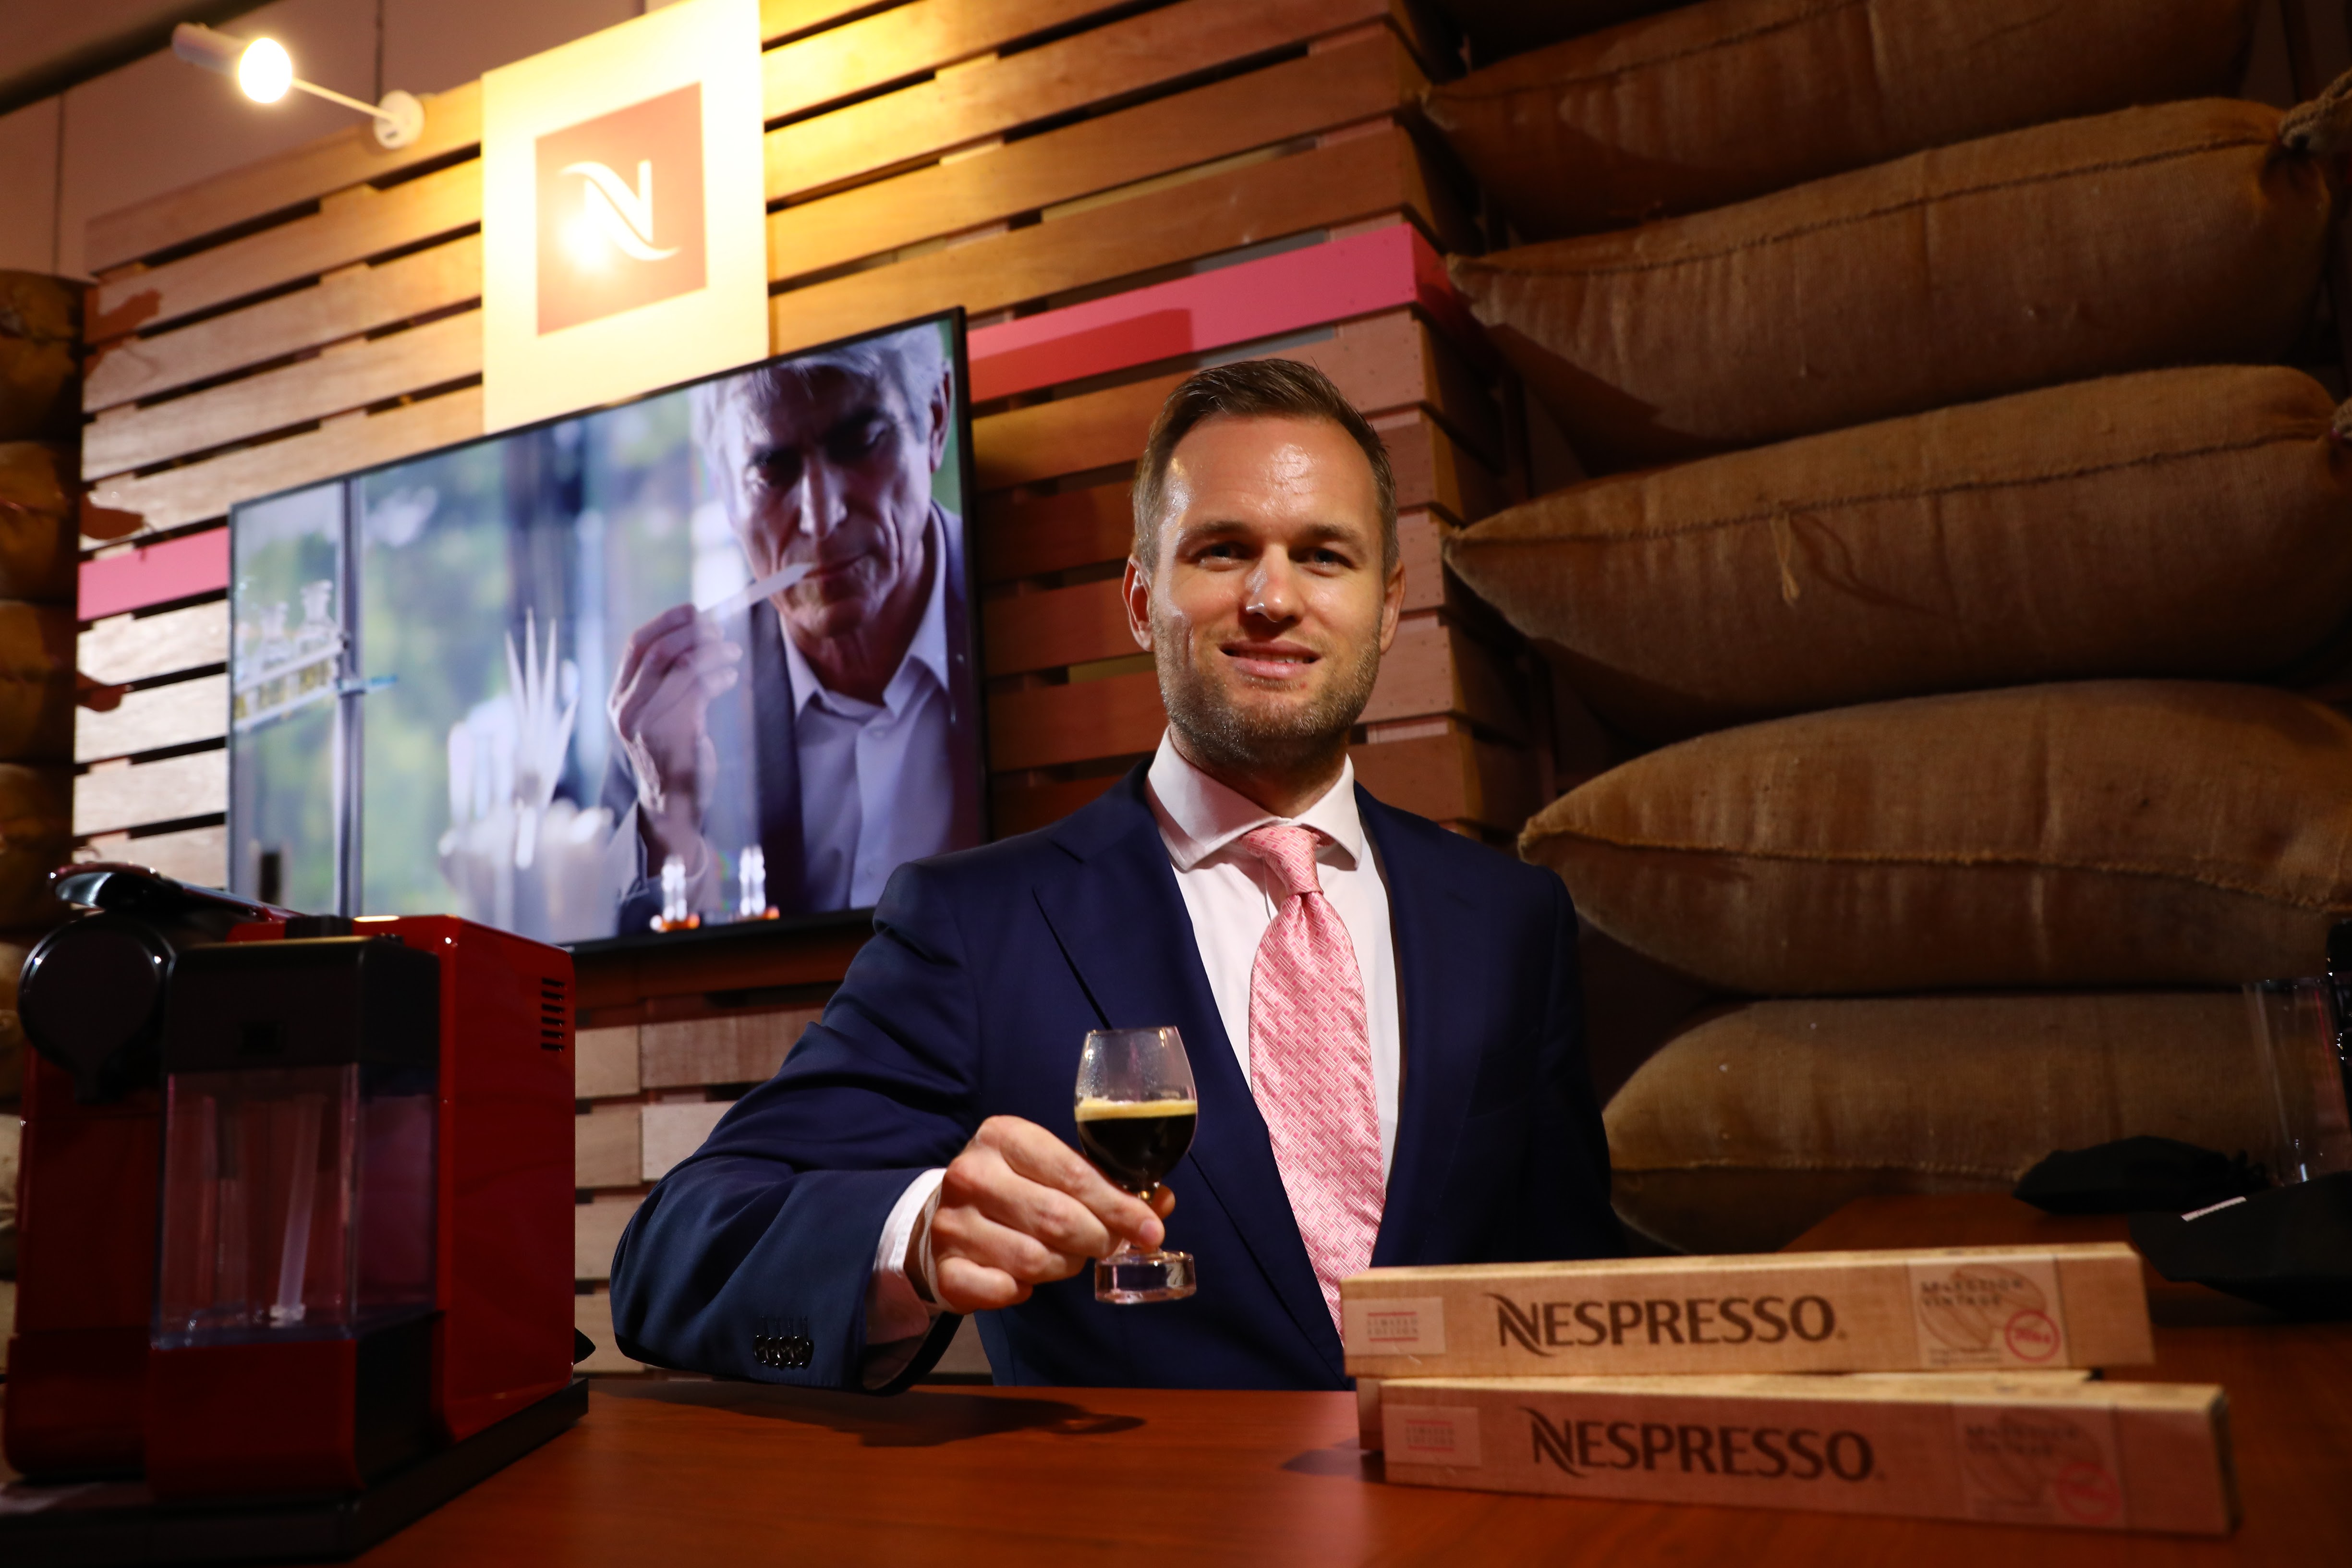 Nespresso Limited Edition SELECTION VINTAGE 2014 Launch, Geoffrey Dalziel, Business Development Manager of Nespresso Malaysia - Pamper.my